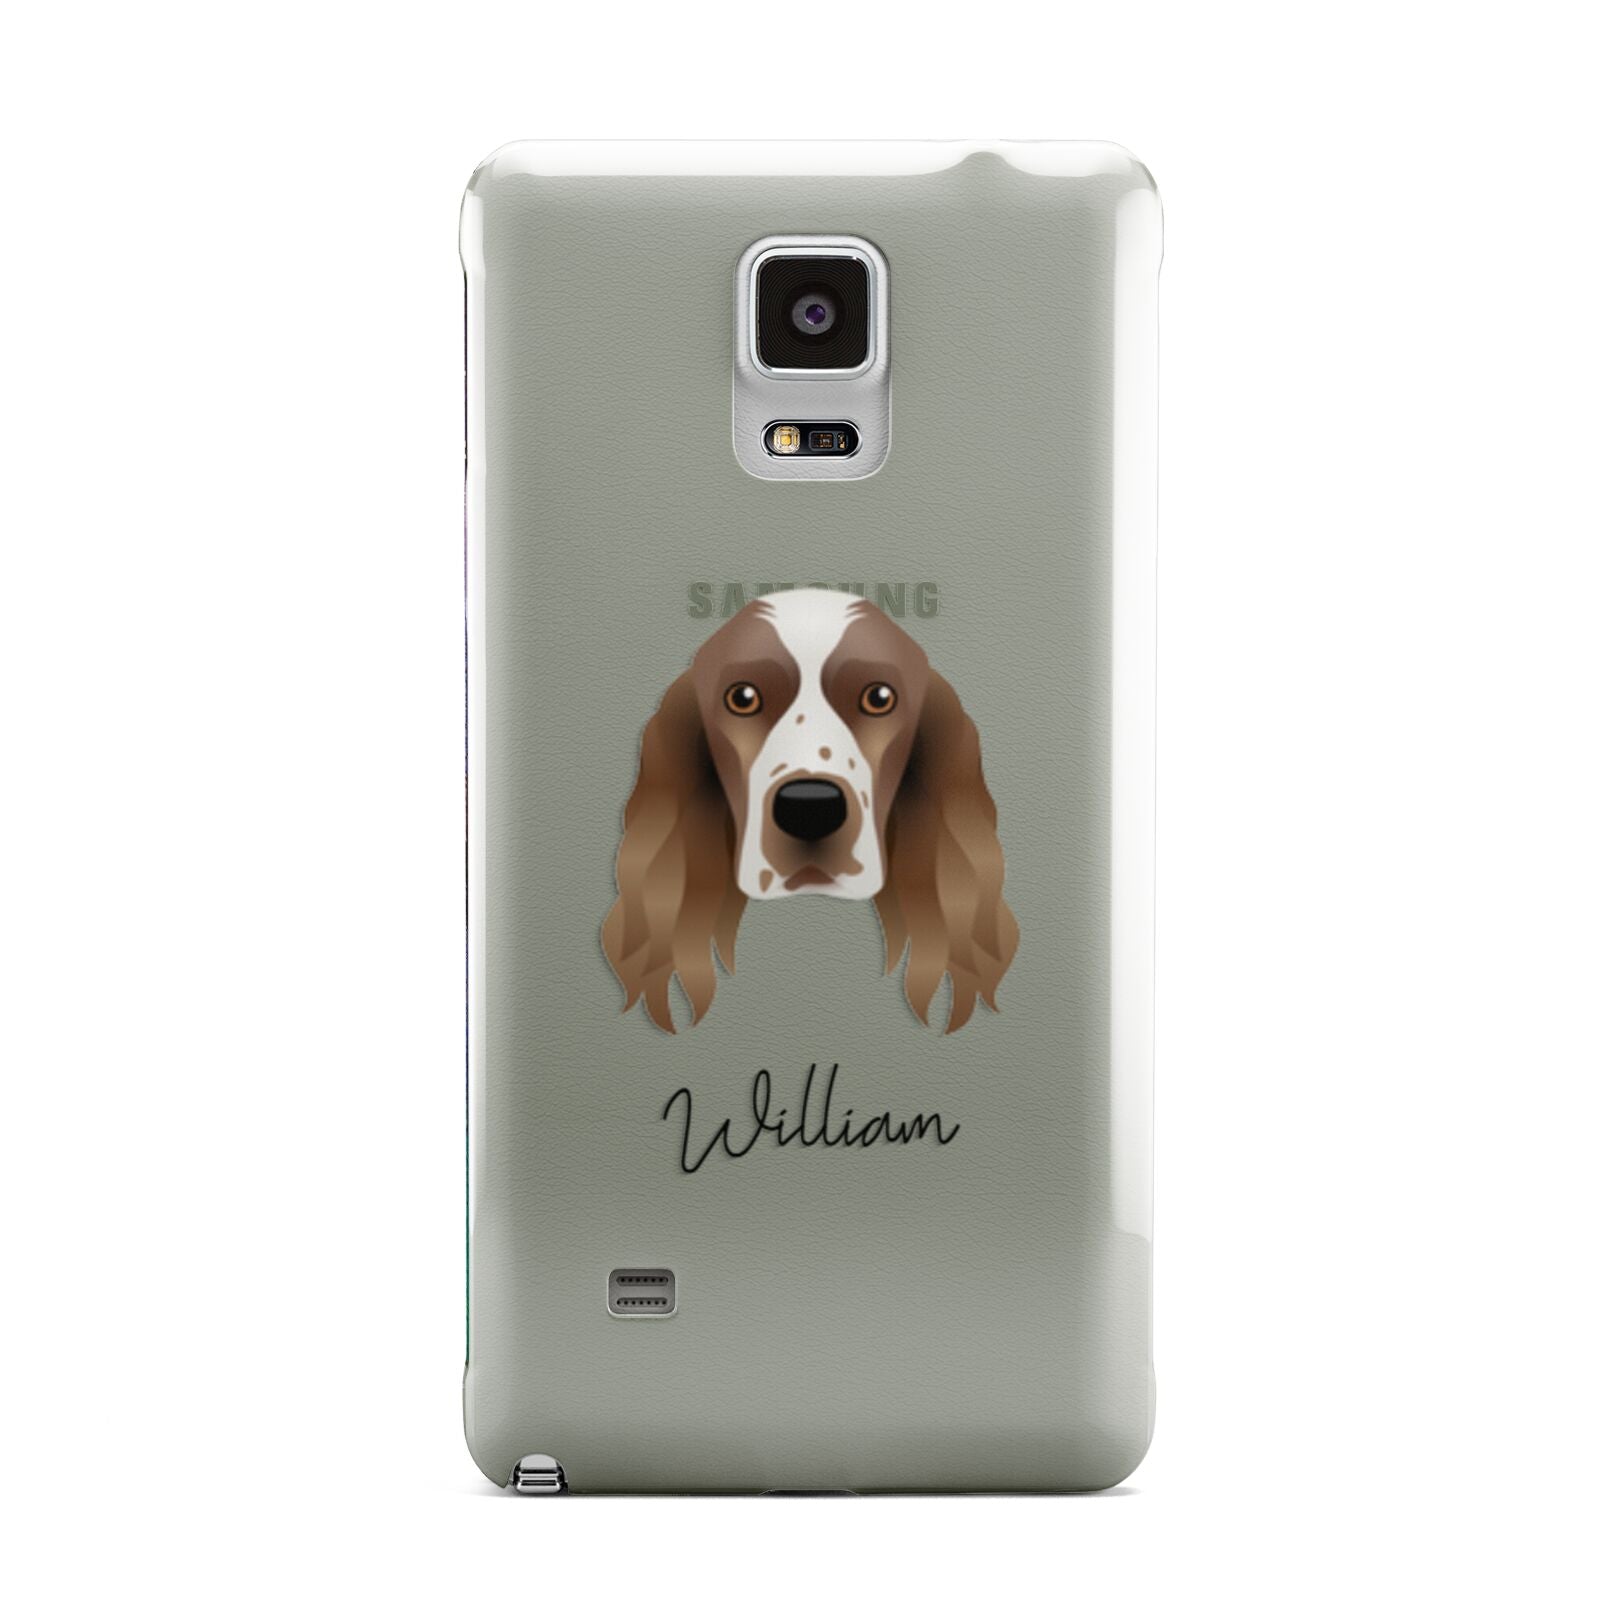 Welsh Springer Spaniel Personalised Samsung Galaxy Note 4 Case